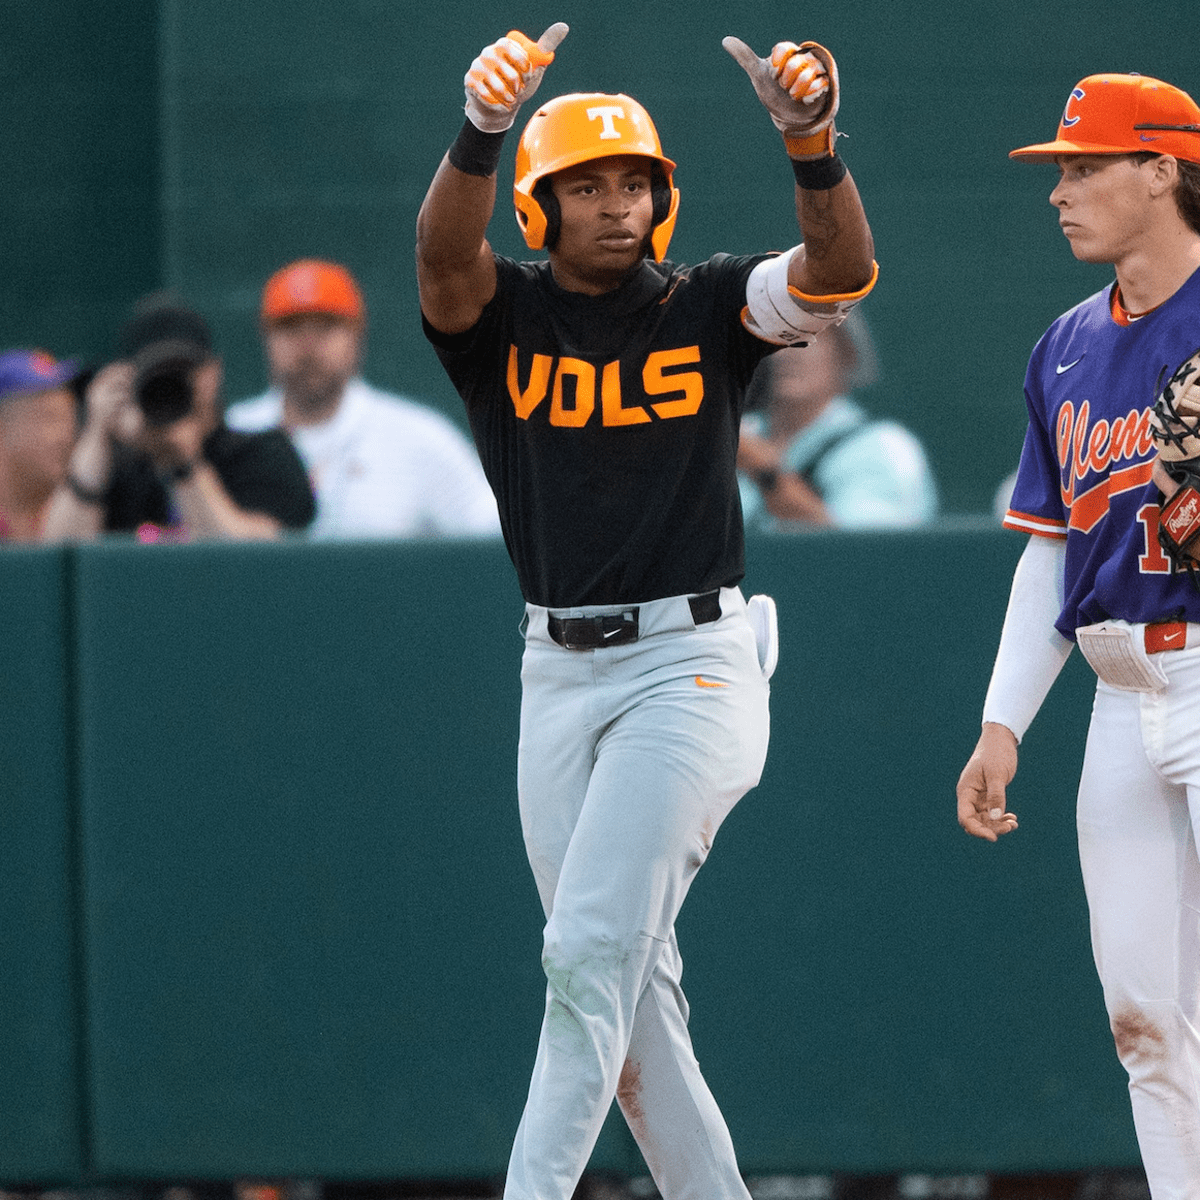 Tennessee baseball game recap: Vols win a thriller against